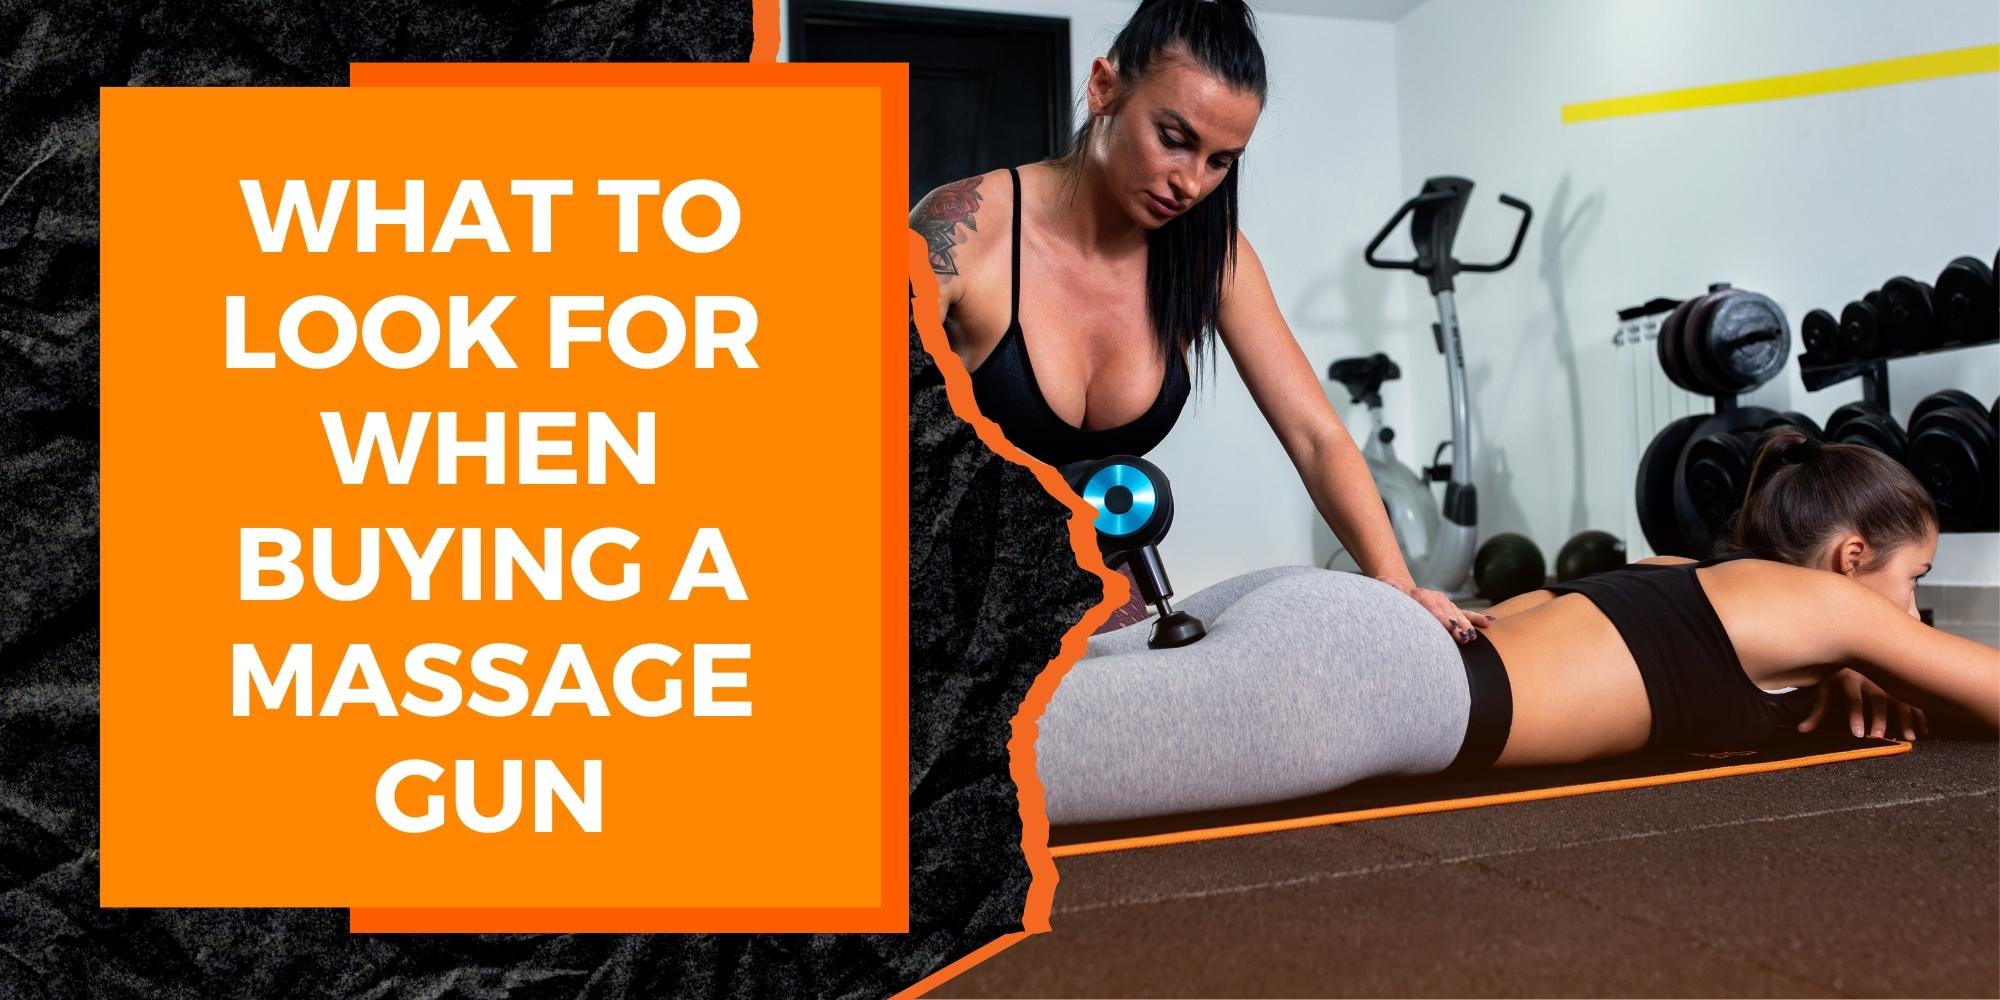 What to Look for When Buying a Massage Gun